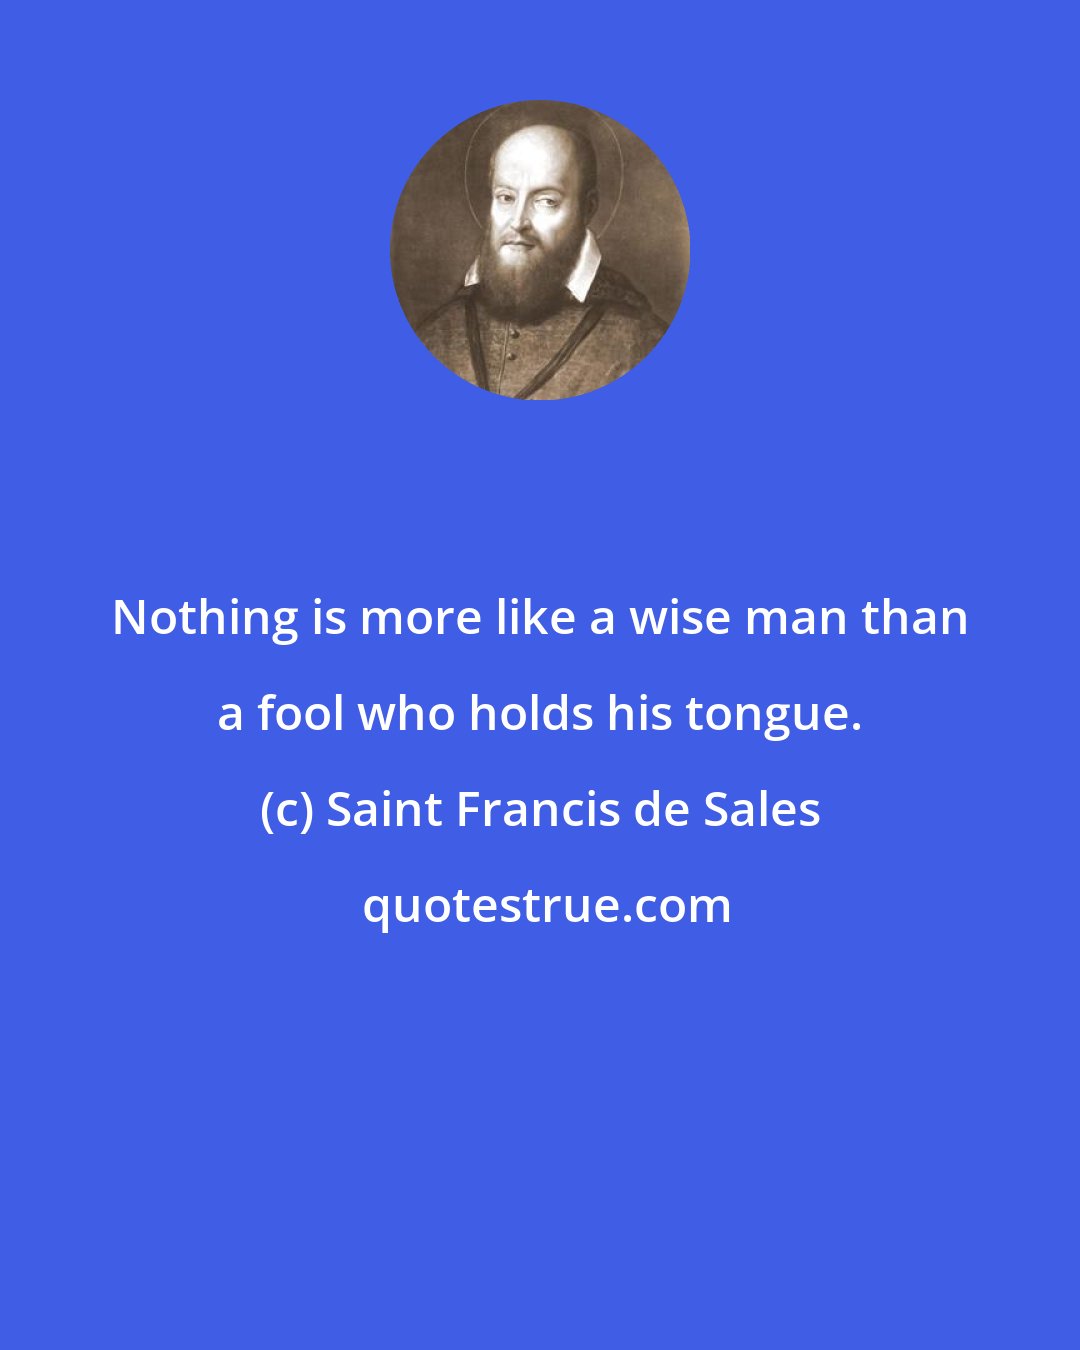 Saint Francis de Sales: Nothing is more like a wise man than a fool who holds his tongue.